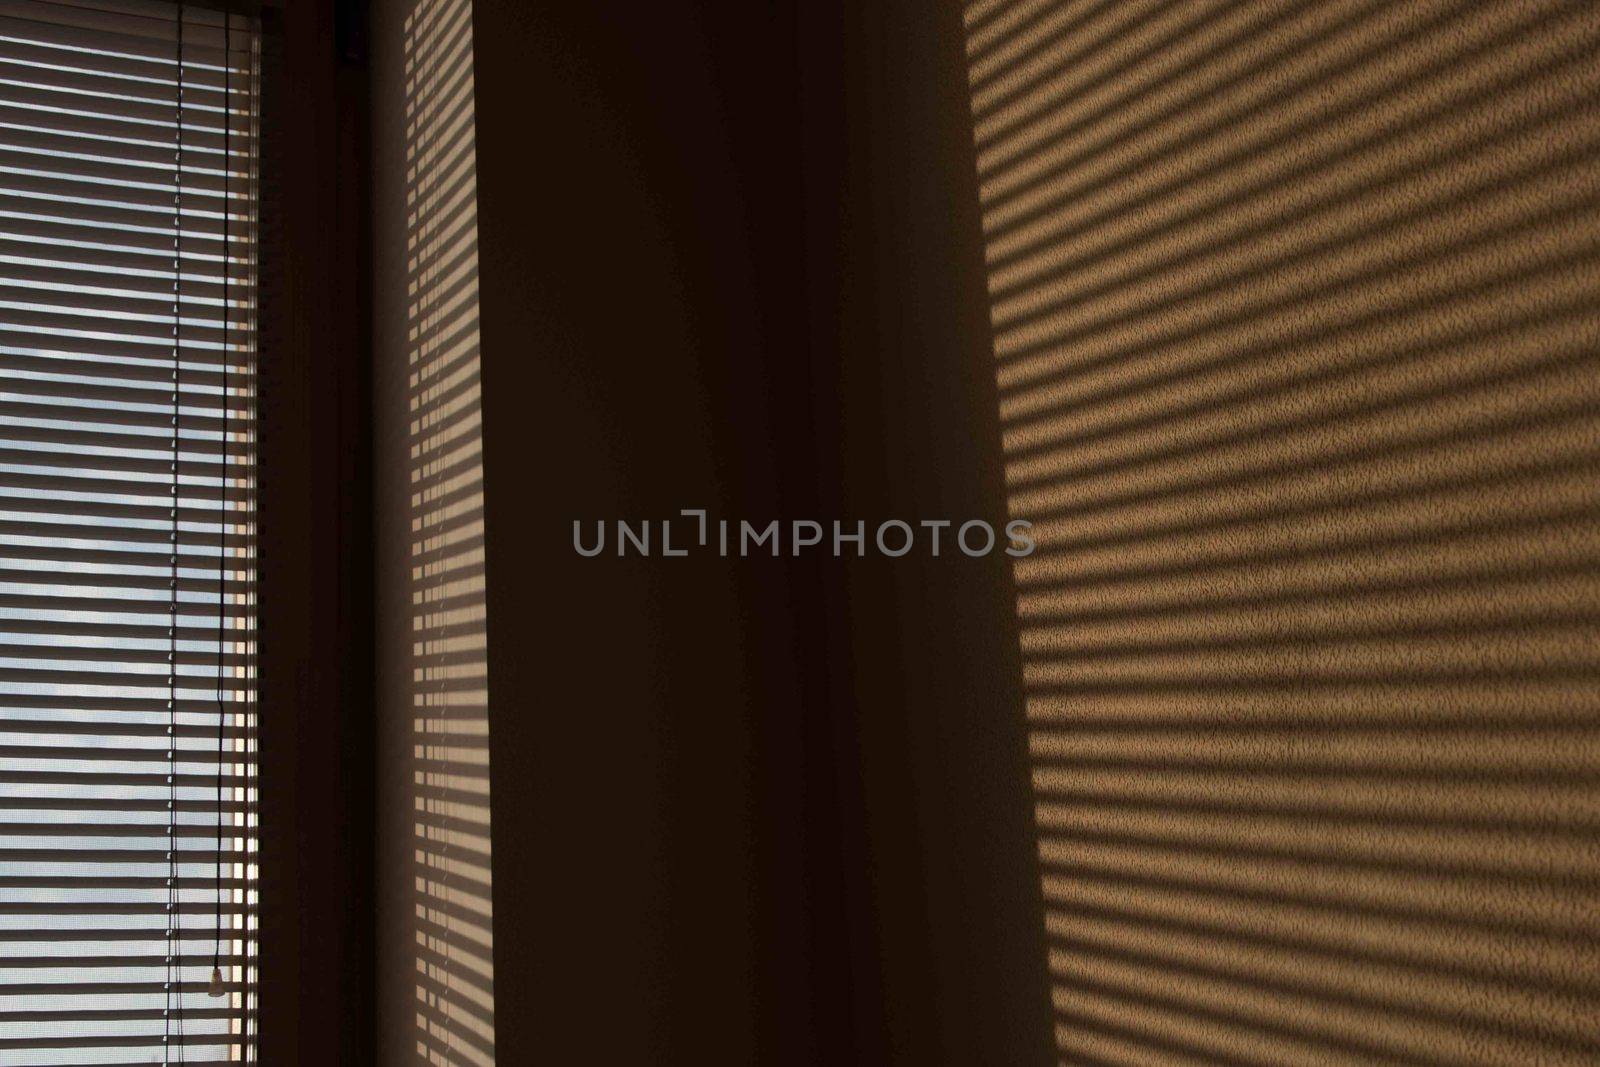 shade of venetian blind on the wall, subject shadow on the wall, shadow wallpaper, shadow. Light falls on a subject and creates shadows on the wallpaper in the room.